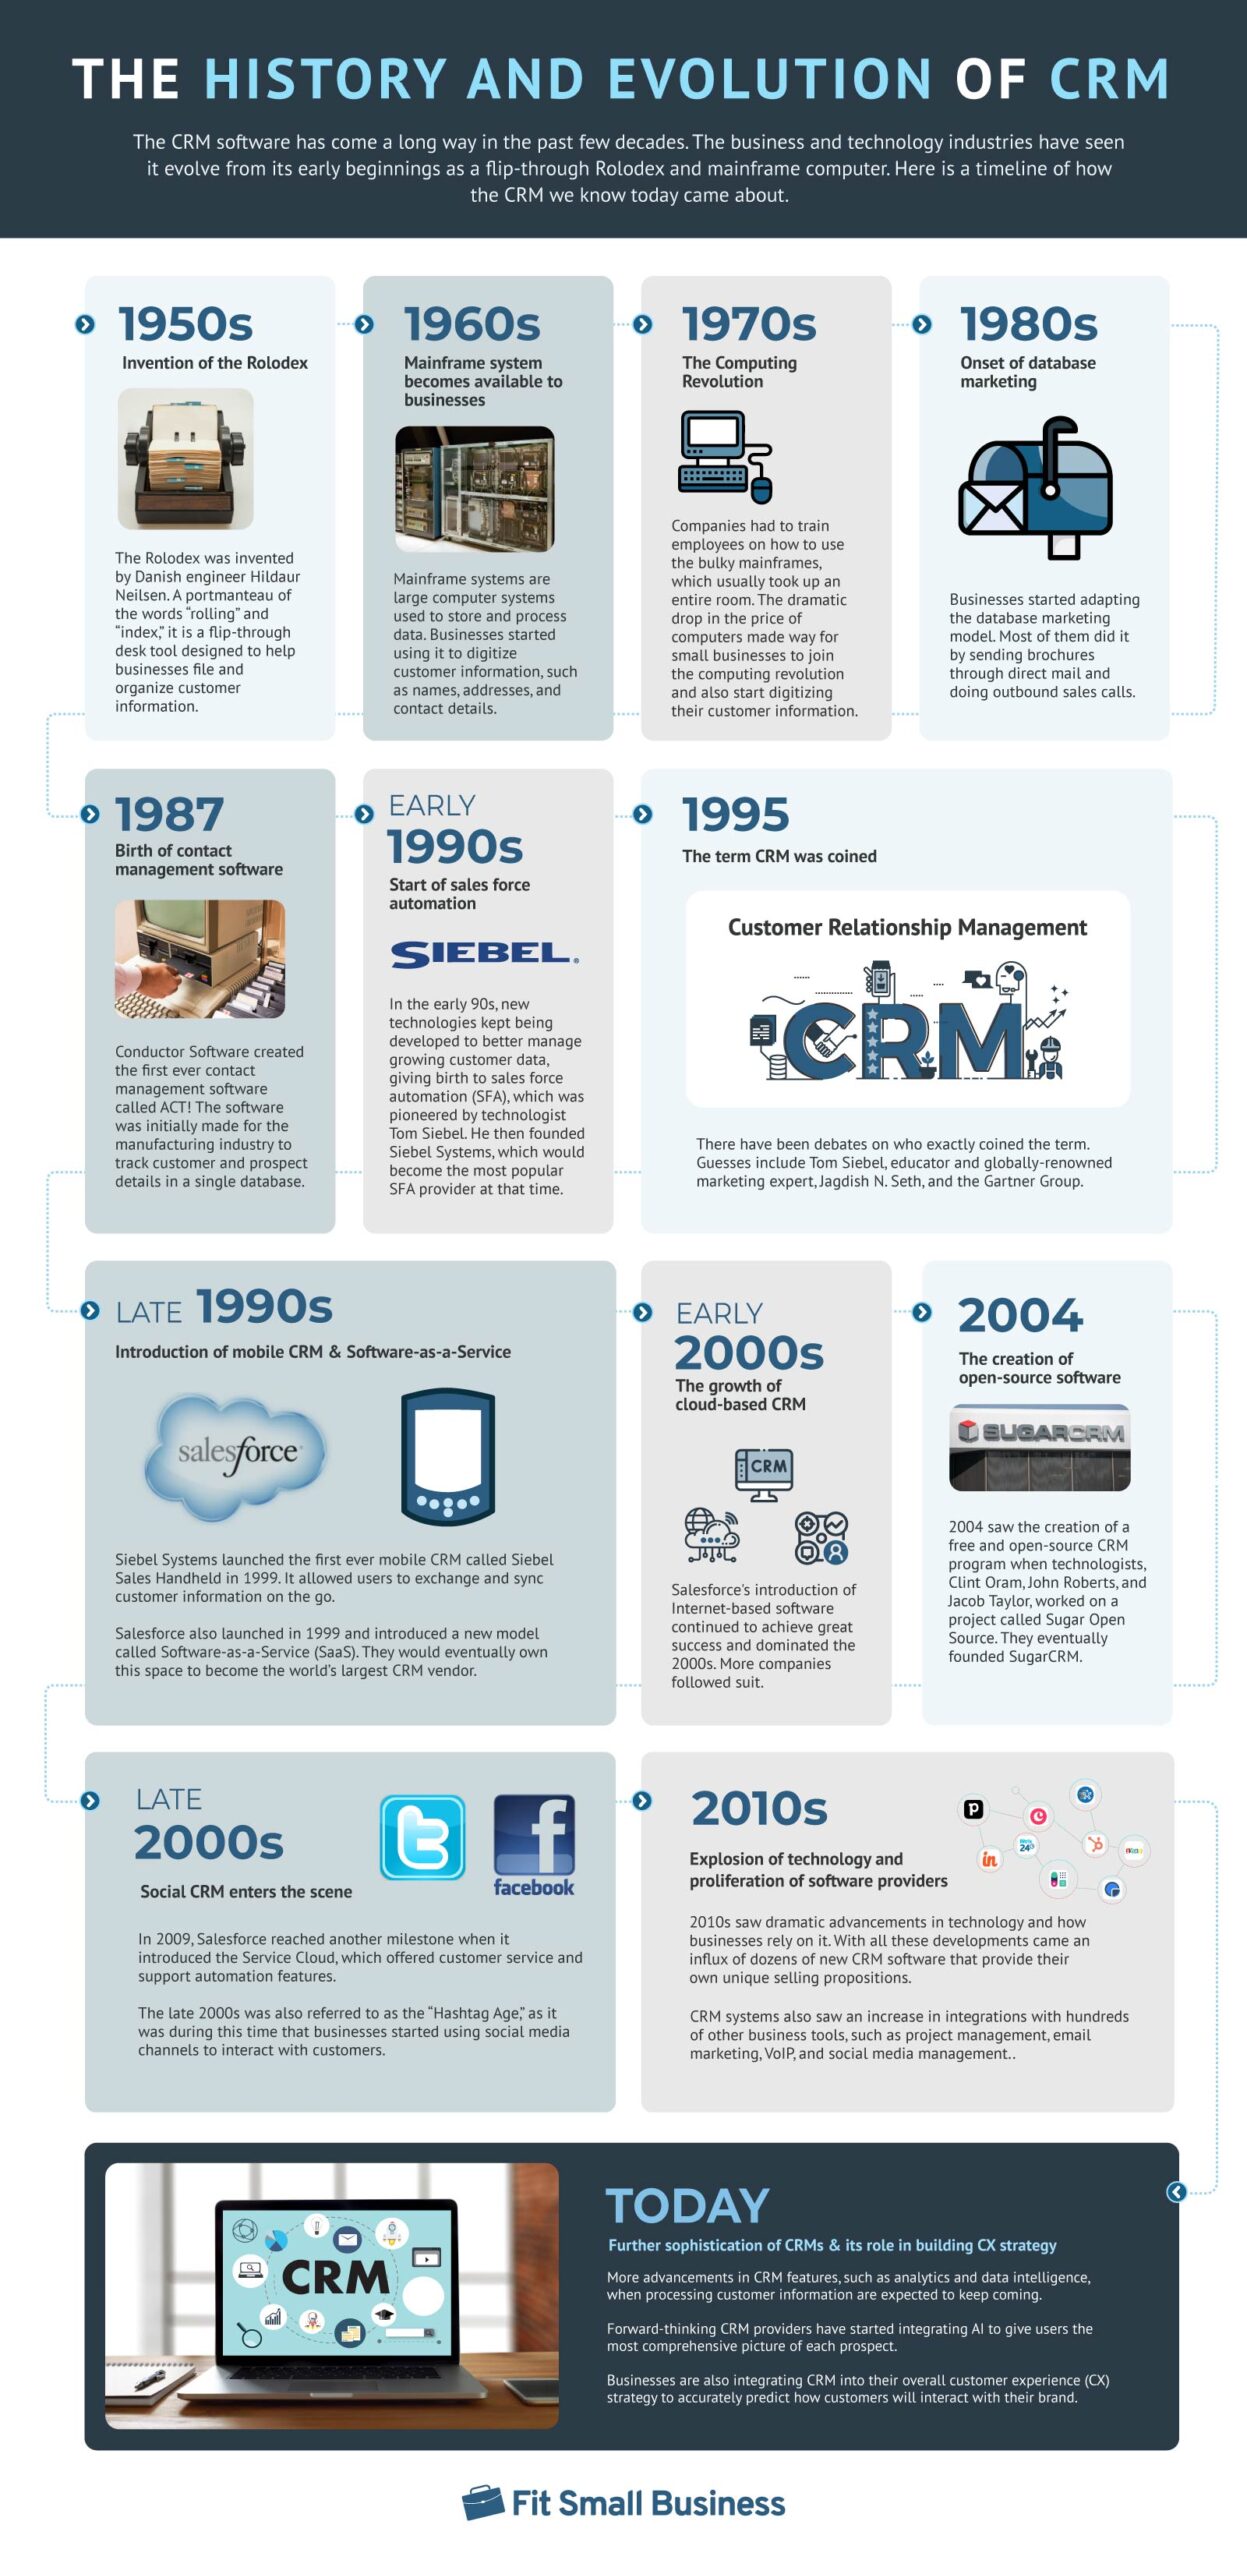 An infographic summarizing the history and evolution of CRM from the 1950s up to the present decade.